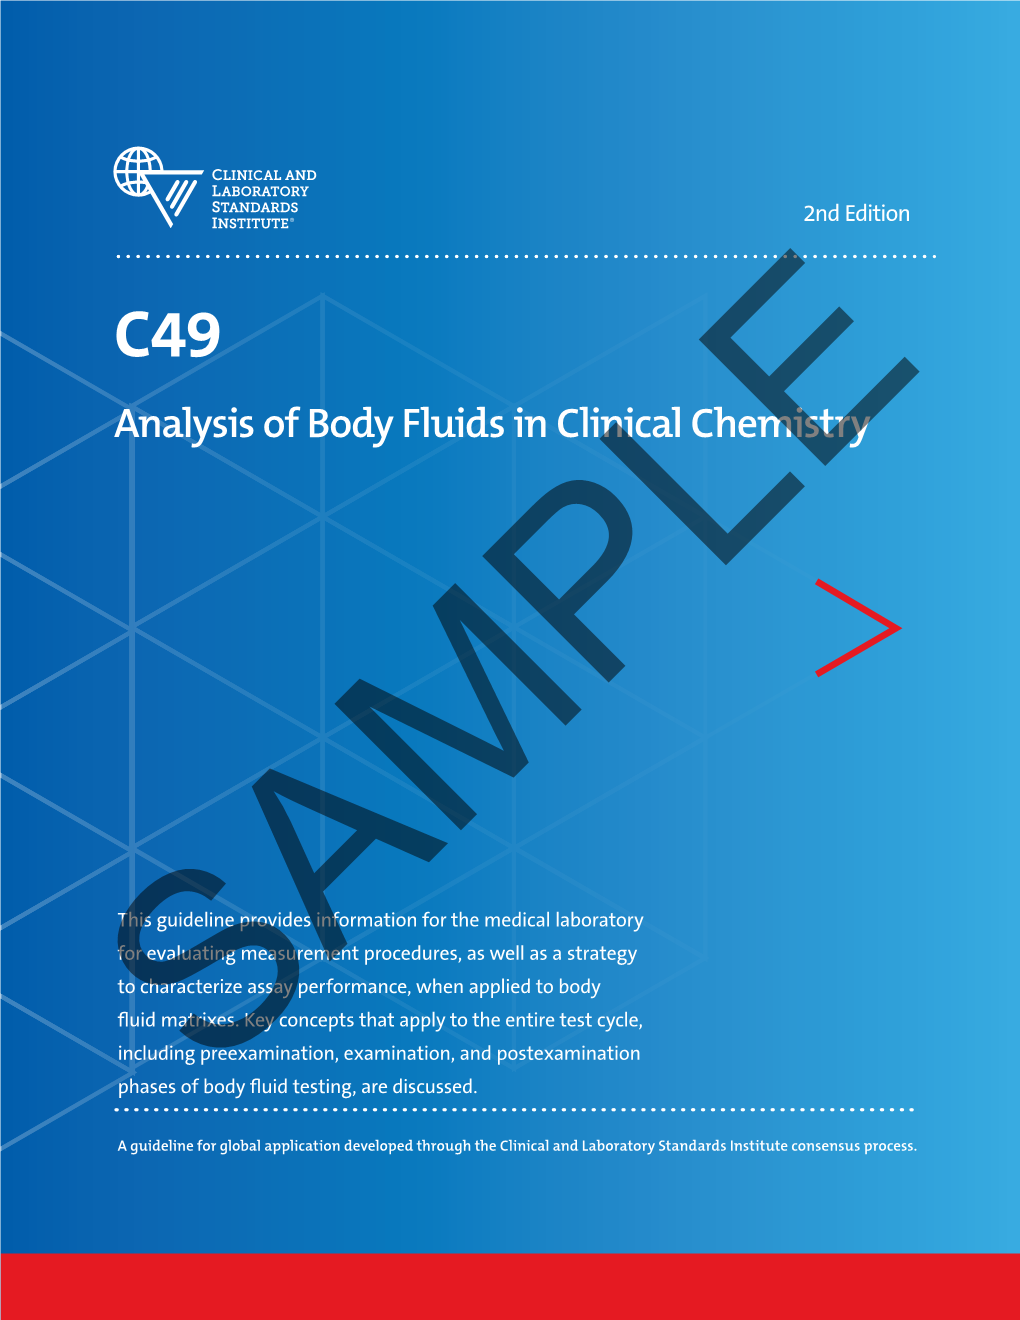 C49 Analysis of Body Fluids in Clinical Chemistry